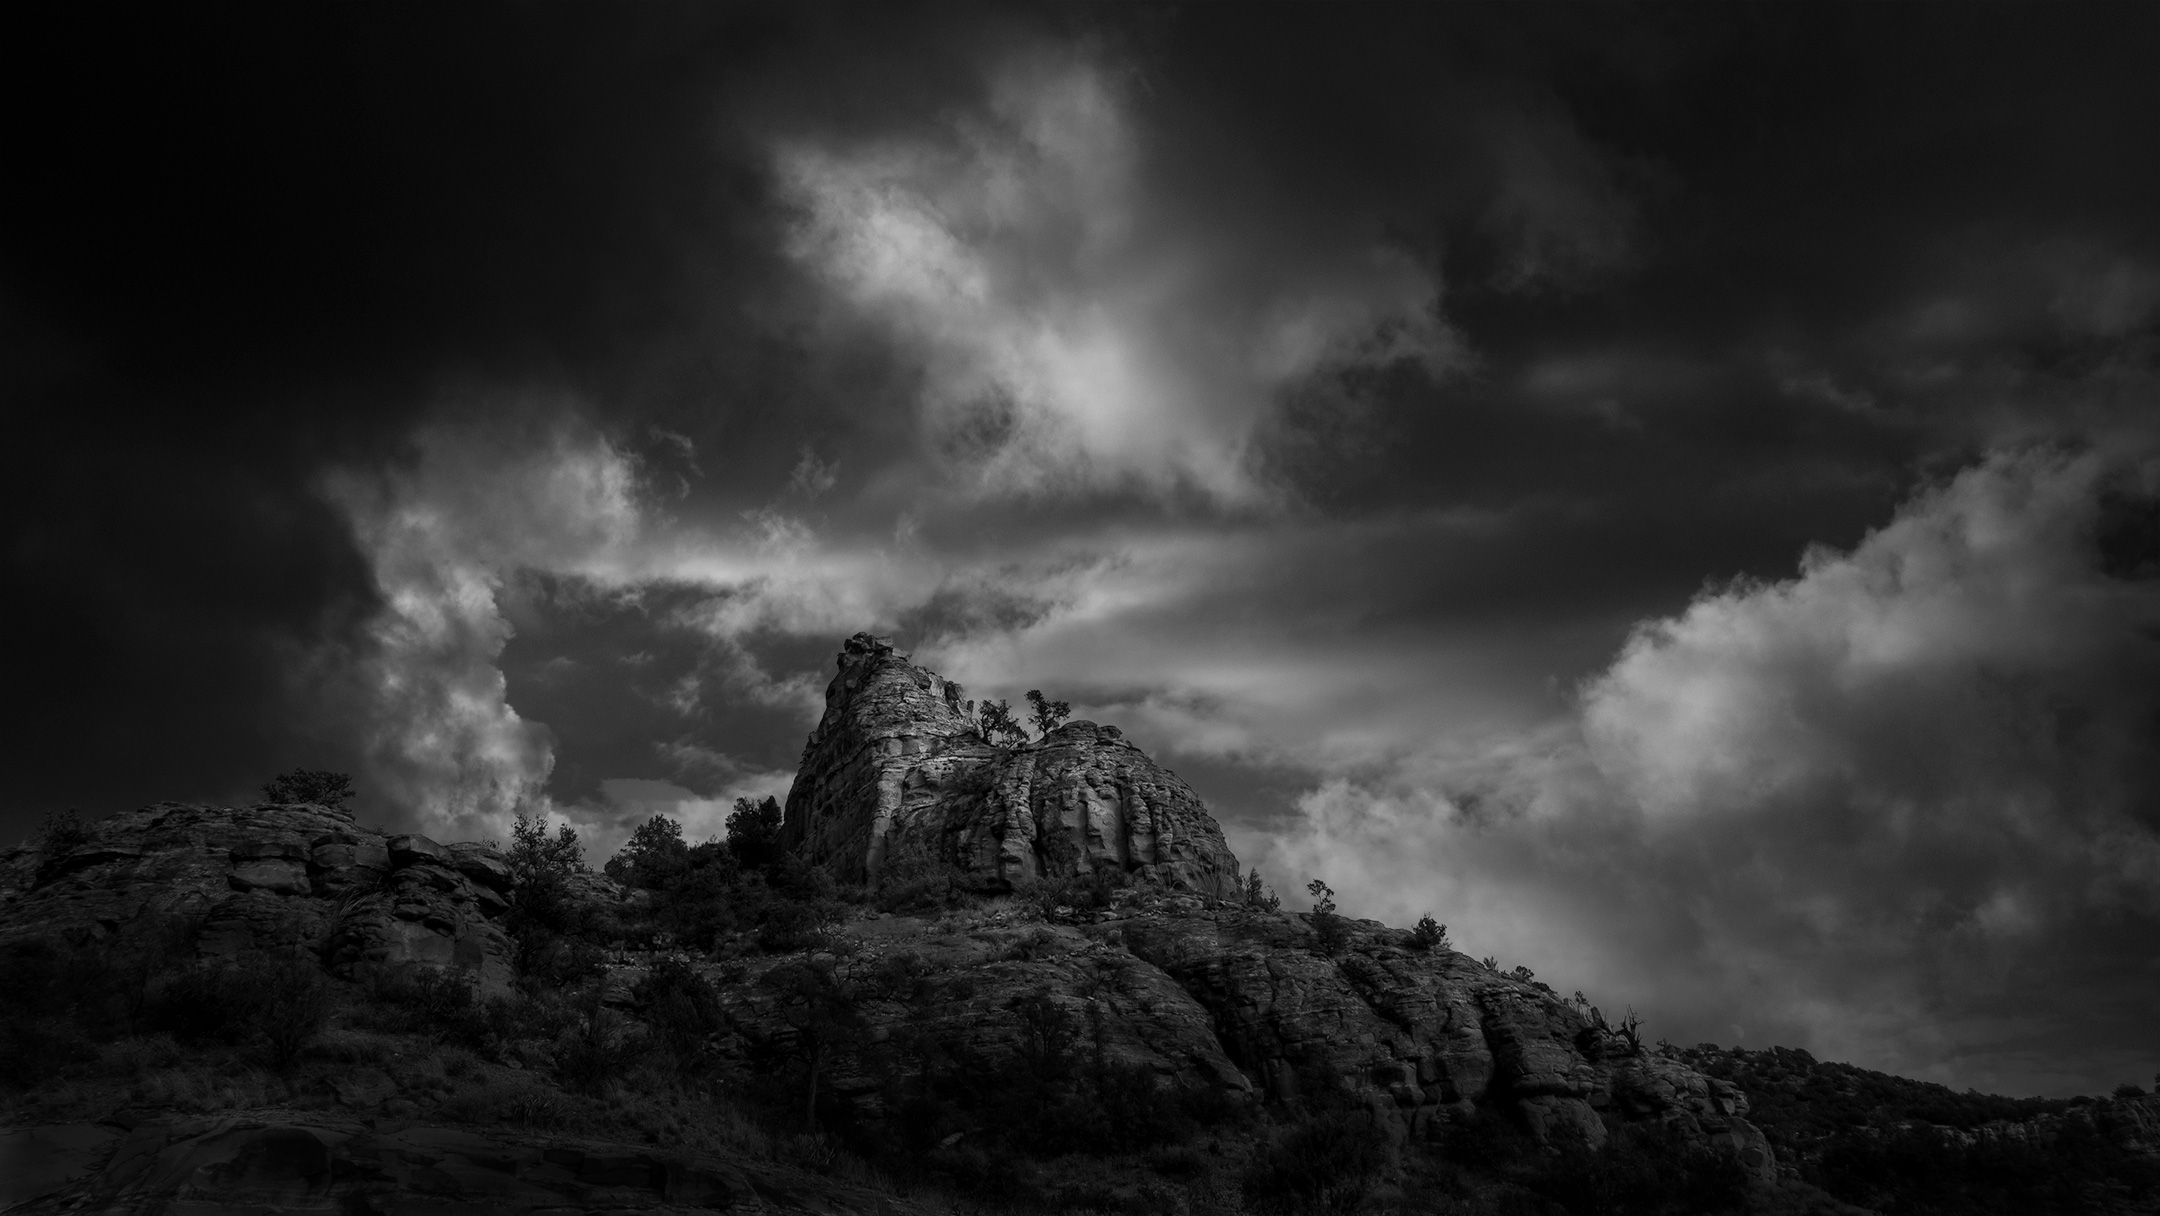 A storm is coming in. Dramatic skies in Sedona. 